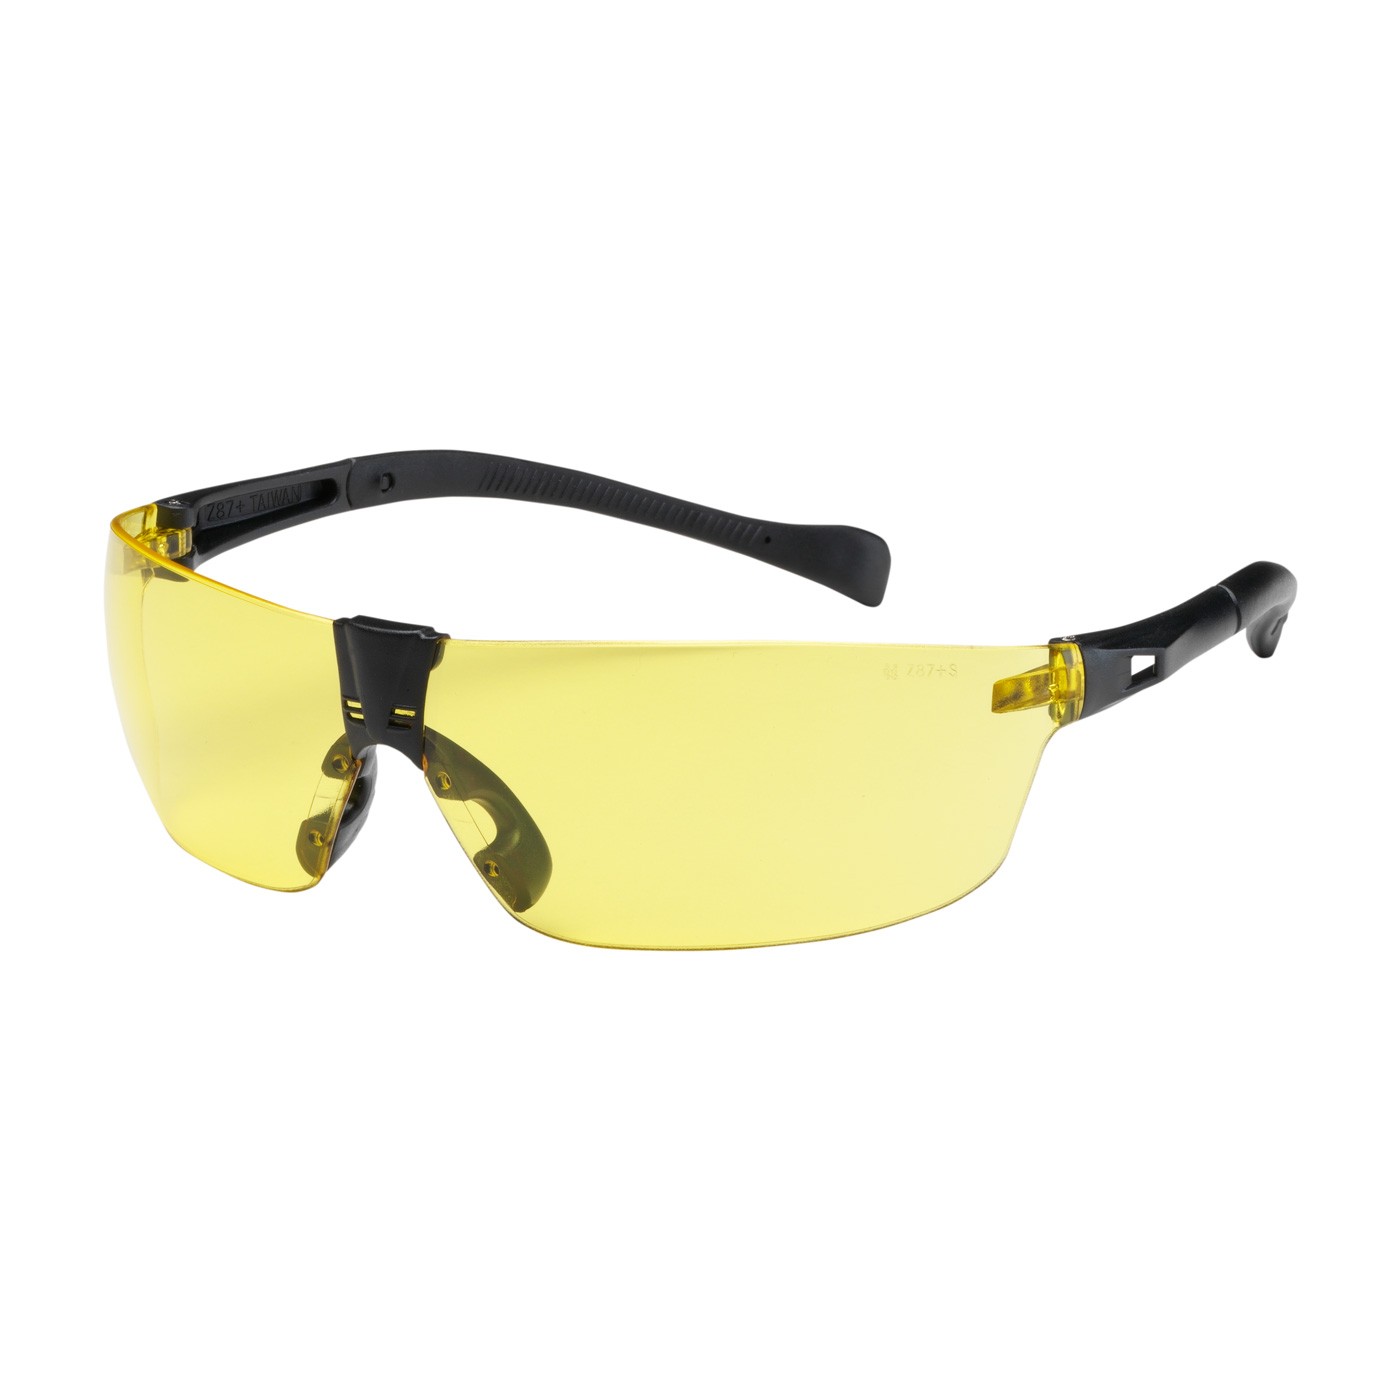 Monteray II™ Rimless Safety Glasses with Black Temple, Amber Lens and Anti-Scratch Coating  (#250-MT-10074)